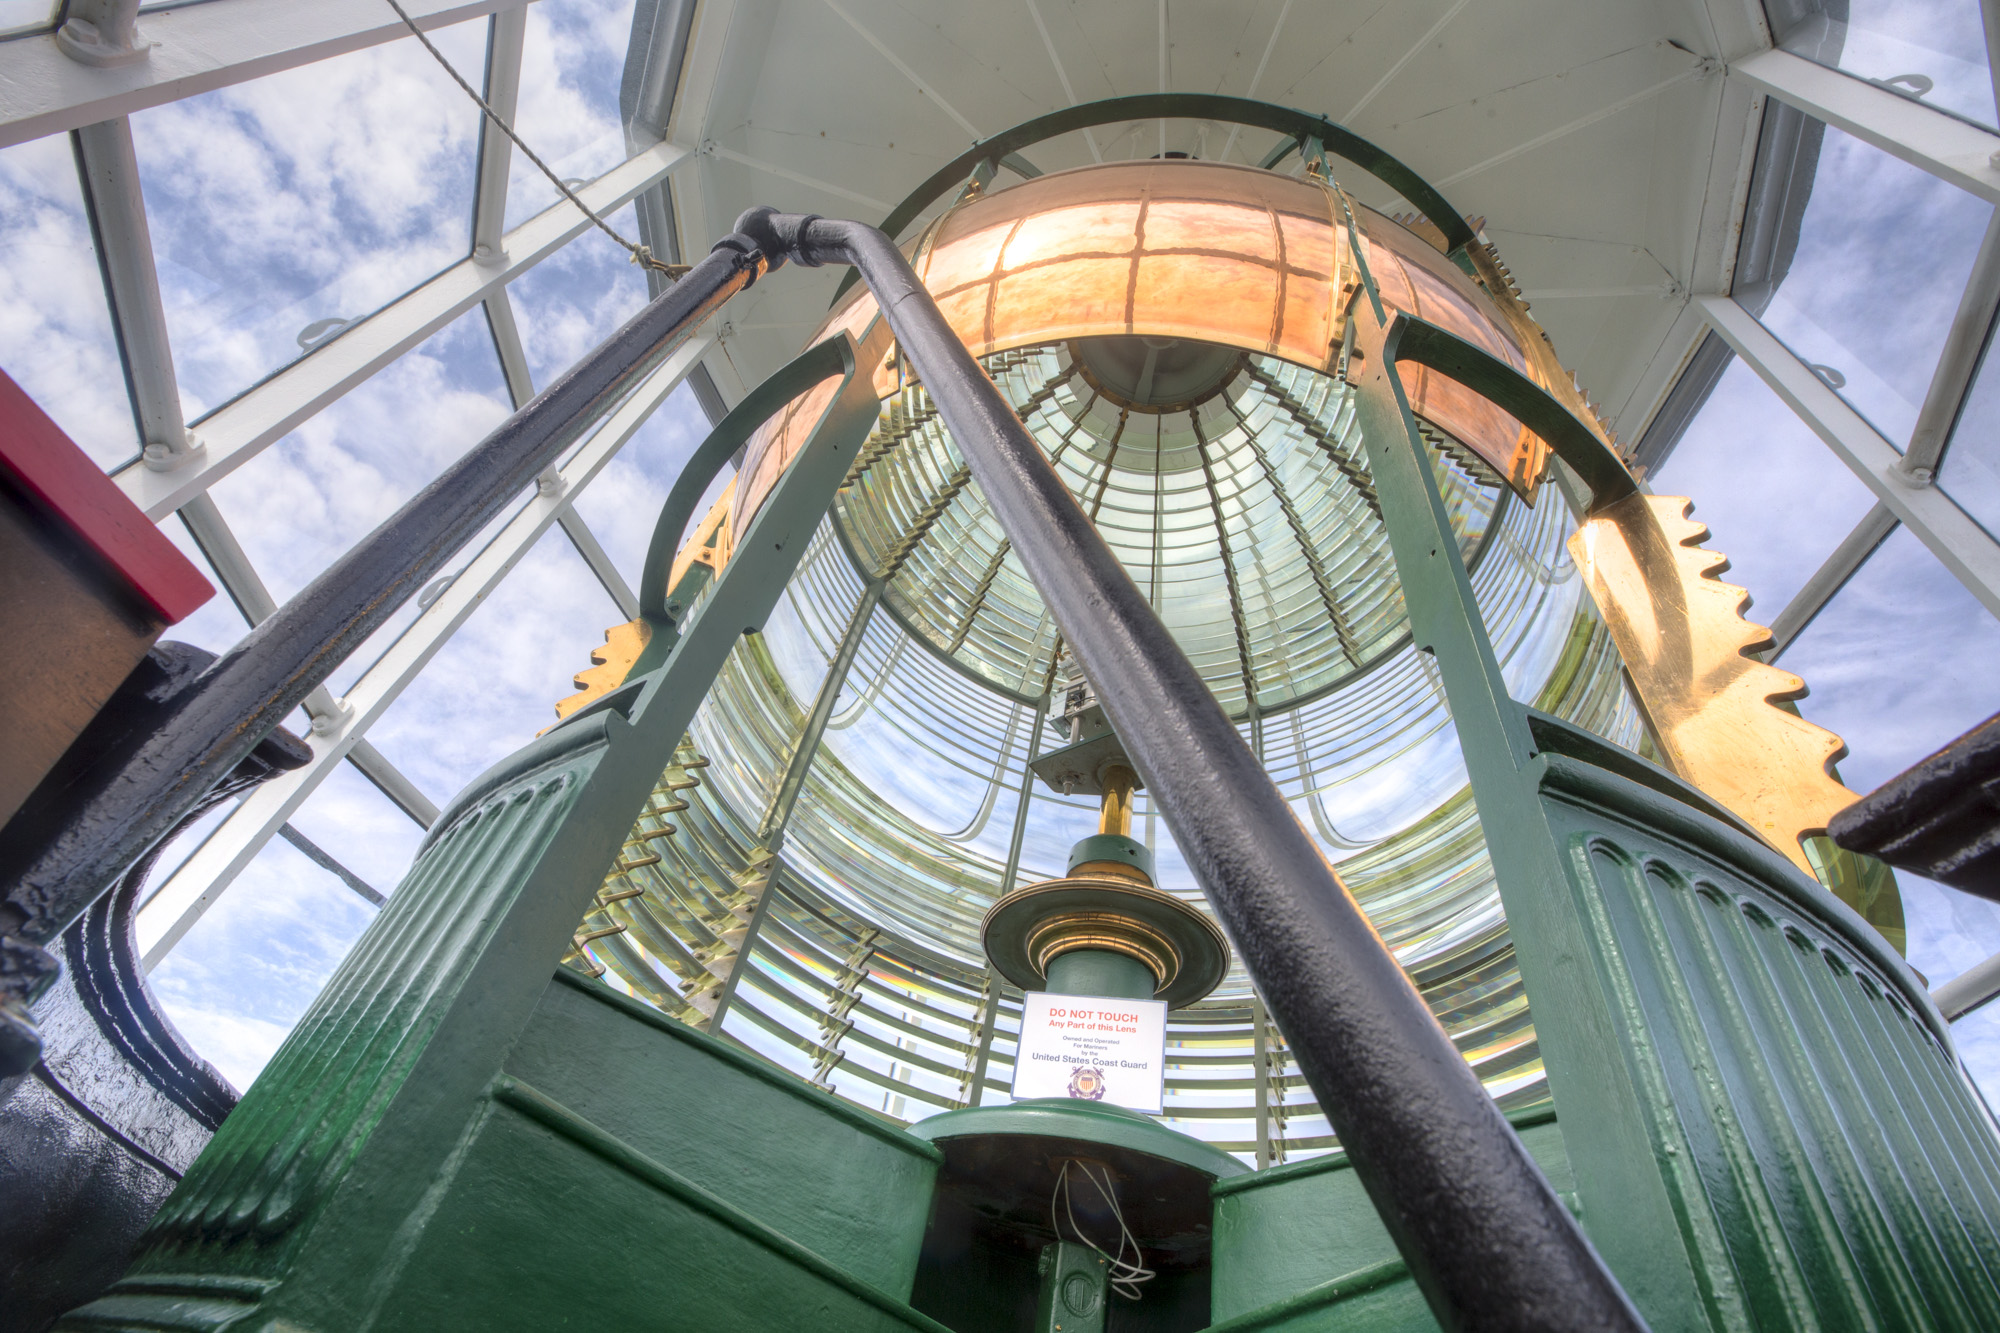 A massive lighthouse lens and light at Yaquina Head Lighthouse in Oregon.